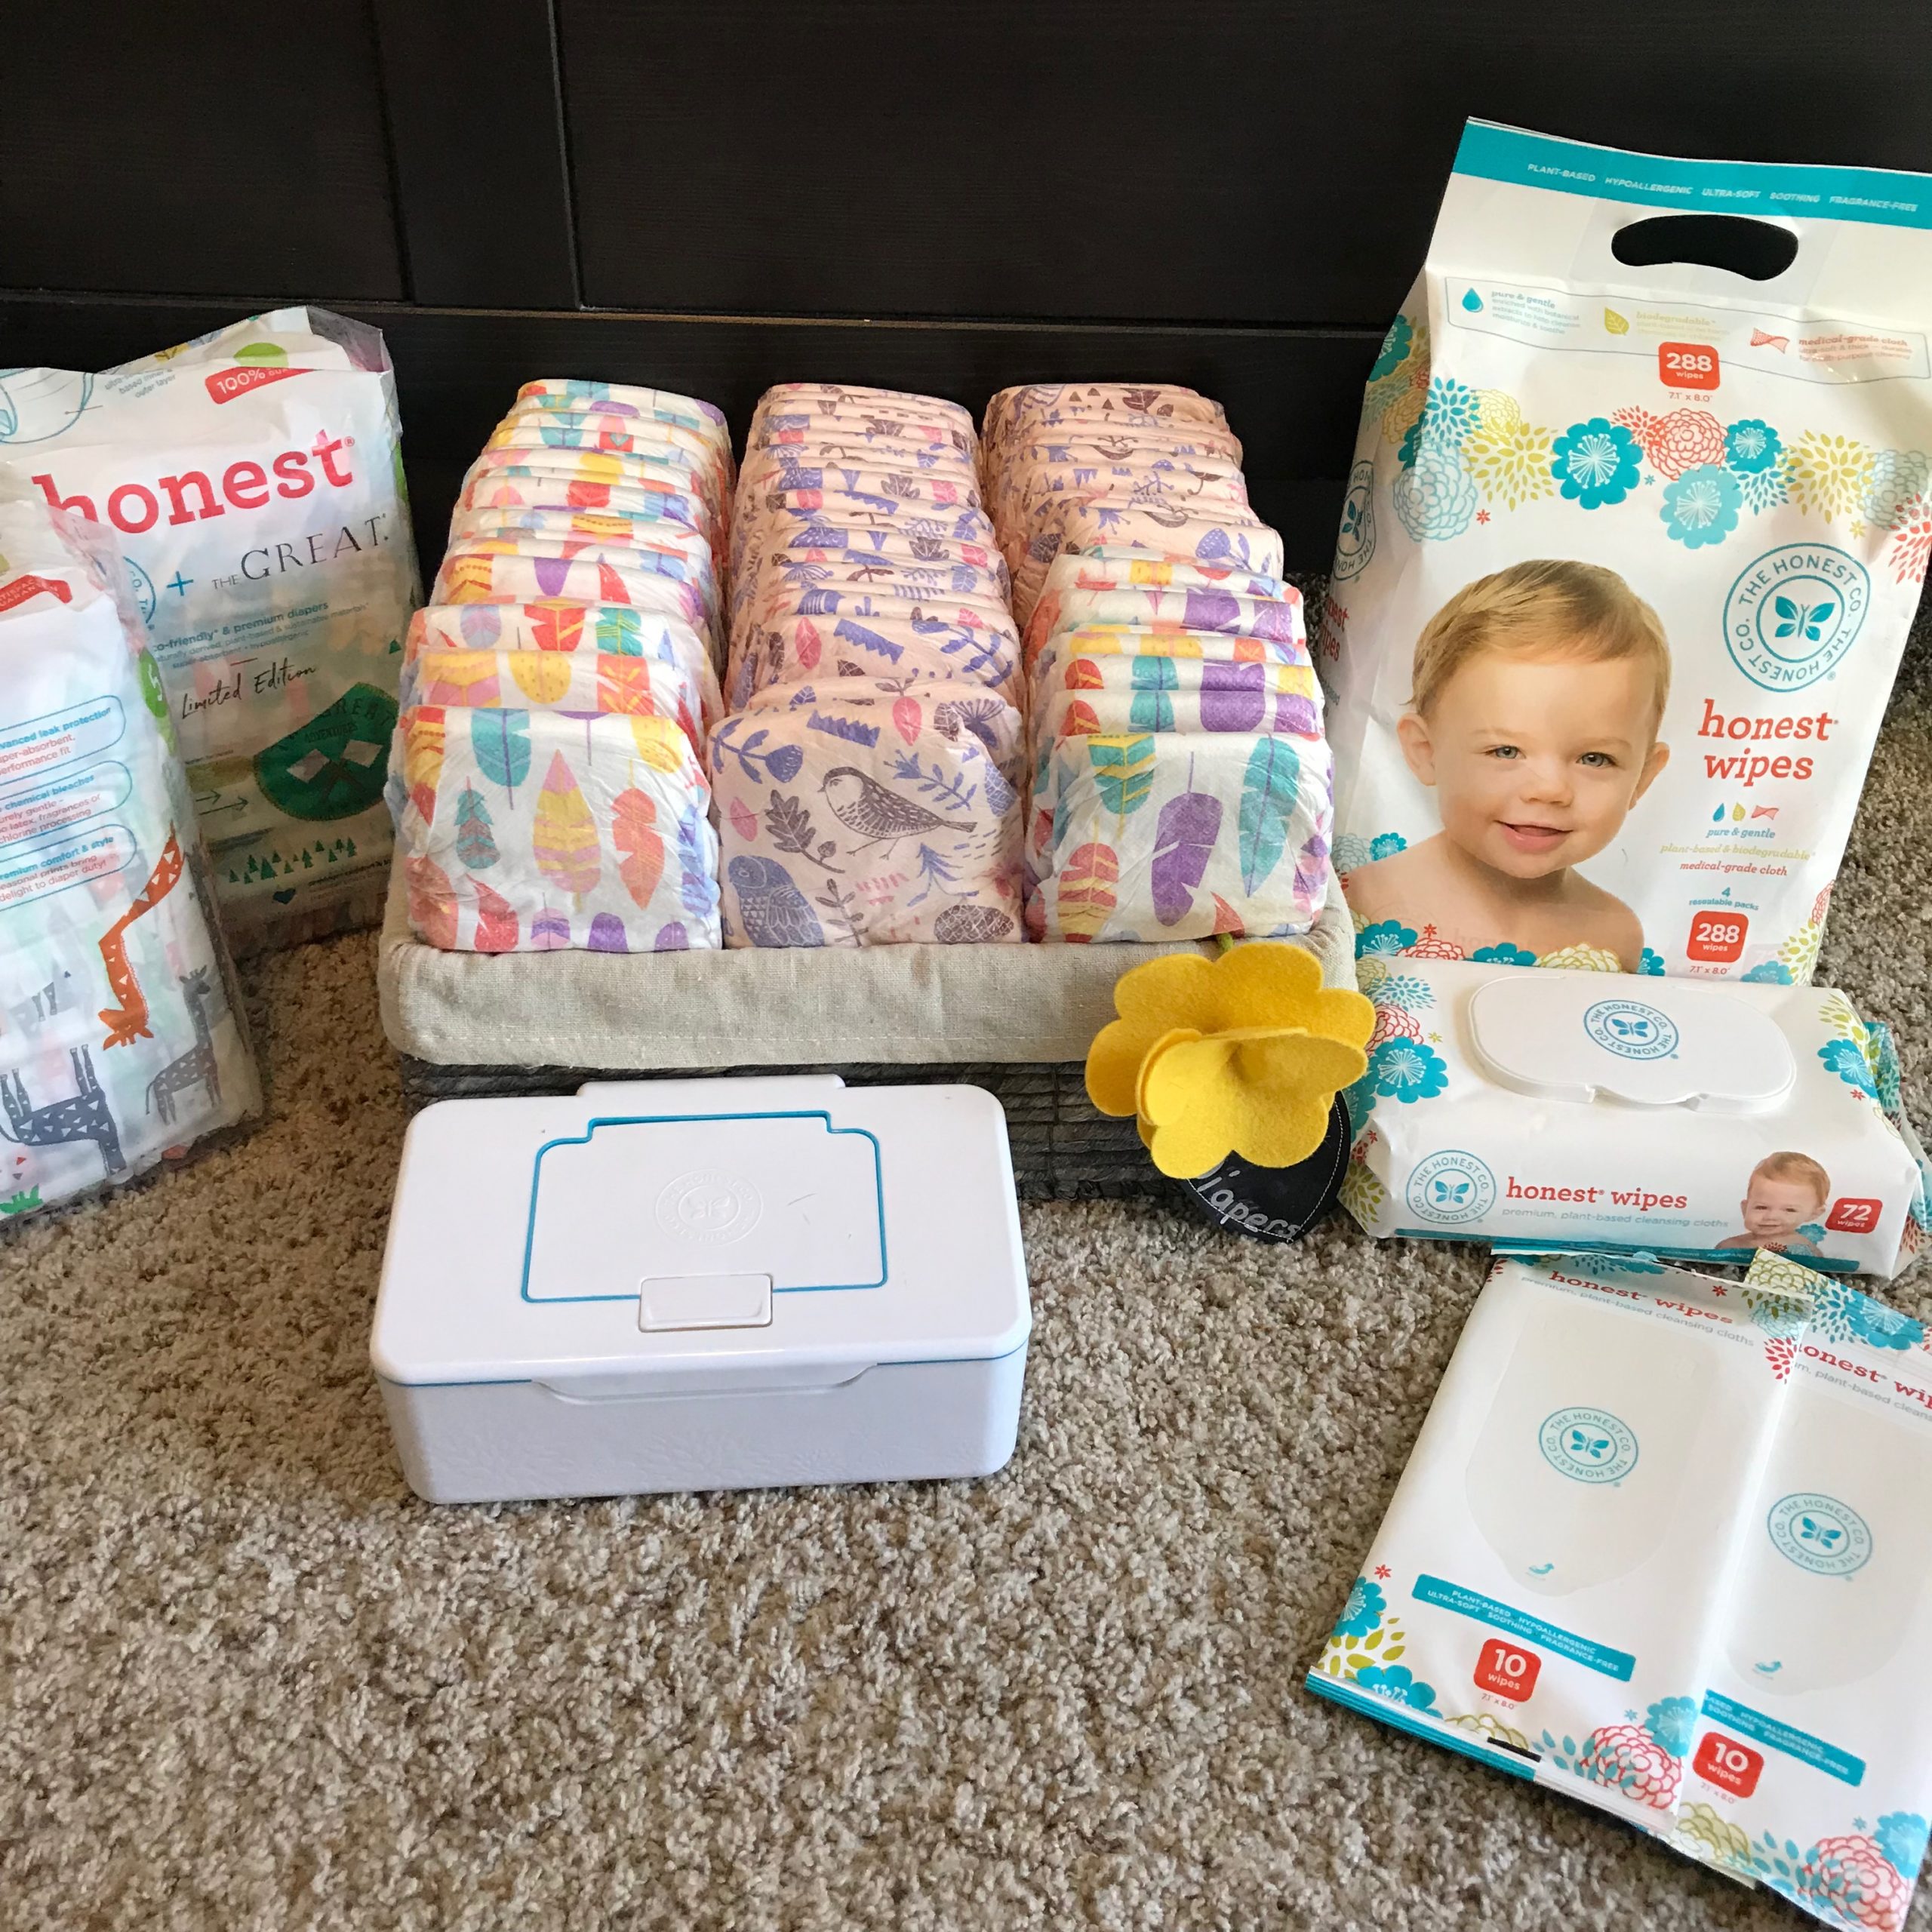 Diapers and wipes from The Honest Company arranged on a carpet